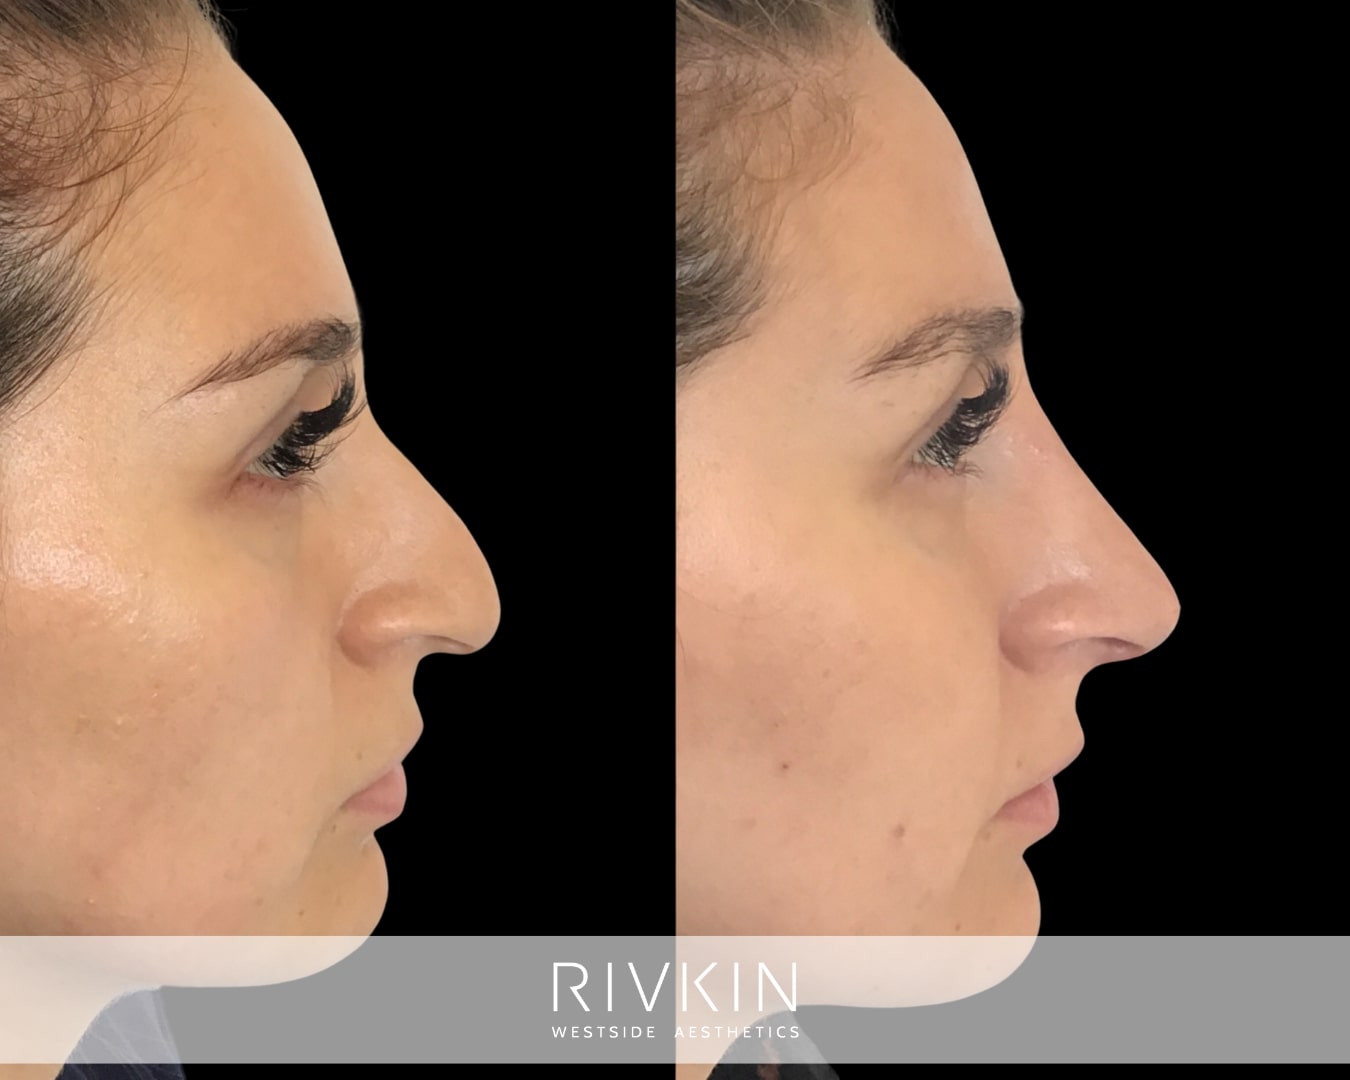 This patient had a nose that drooped down at the tip, making it appear hooked. Dr. Rivkin was able to give her a beautifully straight, and elegant nose using injections of dermal filler. By lifting the tip of her nose, and projecting it forward, her nose now blends in better with the rest of her features.